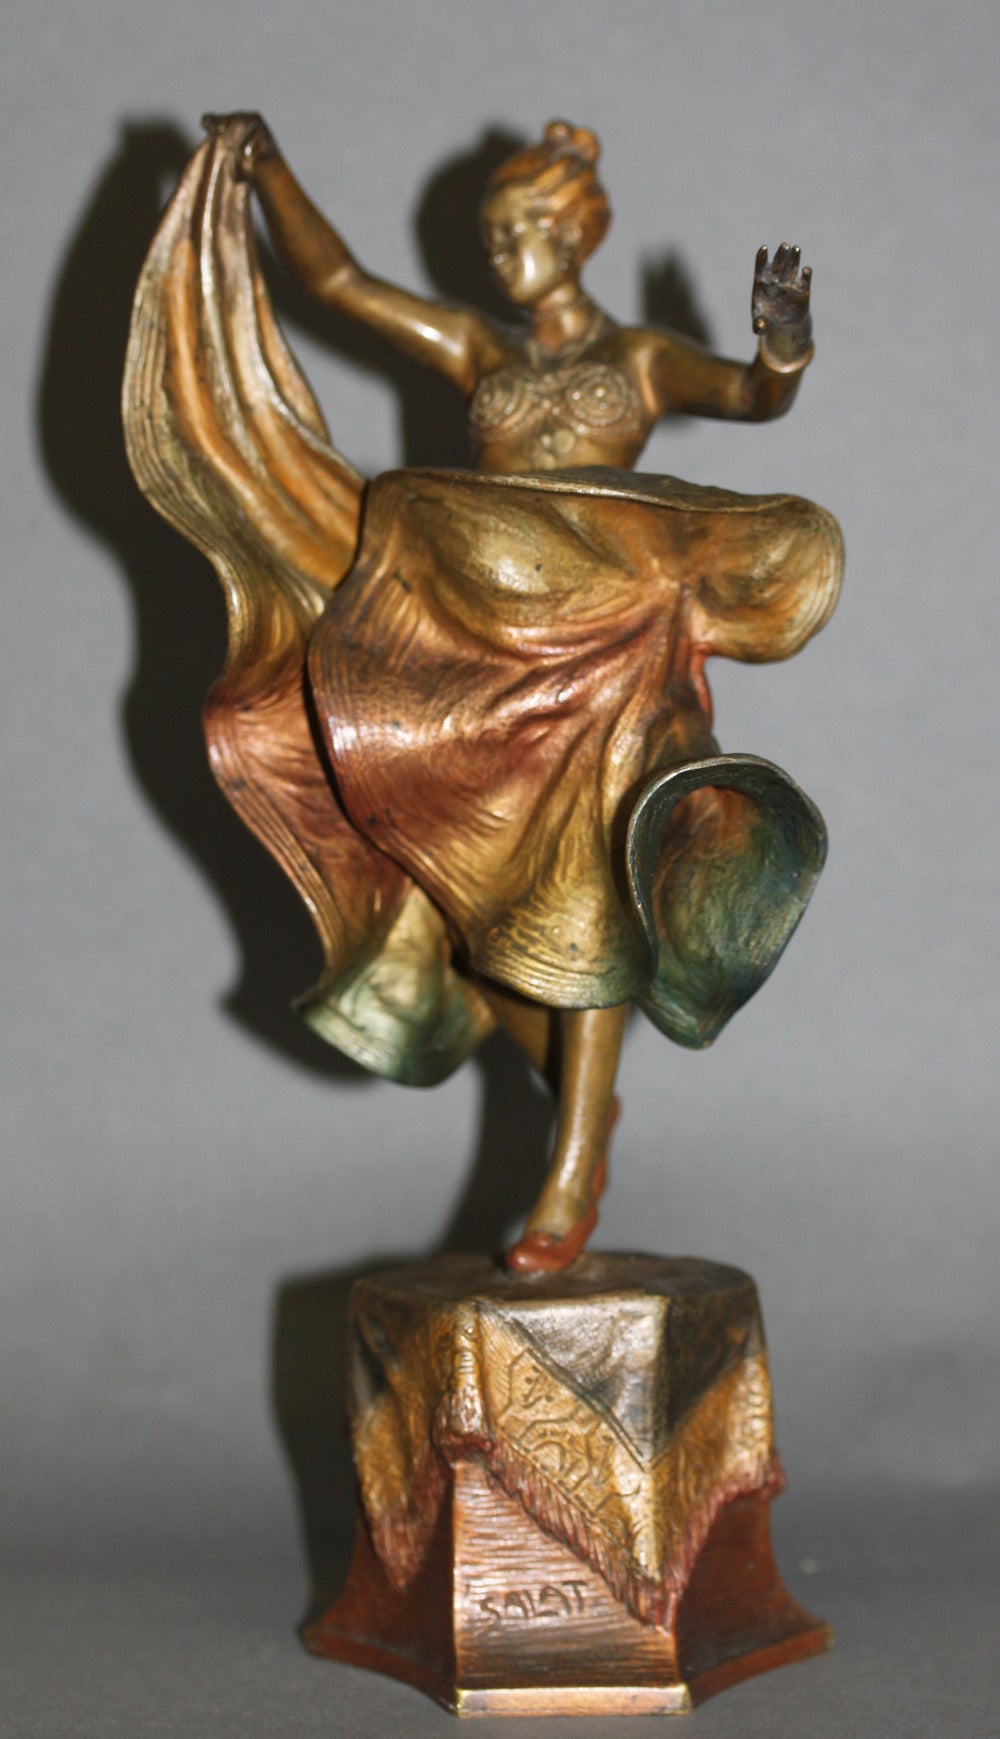 A mechanical Vienna bronze cold painted figure of an exotic dancer by Bruno Zach. 

Her dress opens into a nude dancer. 

Signed. Salat (Austrian pseudonym for Bruno Zach 1891-1945), 

Austria, circa 1910.

Excellent